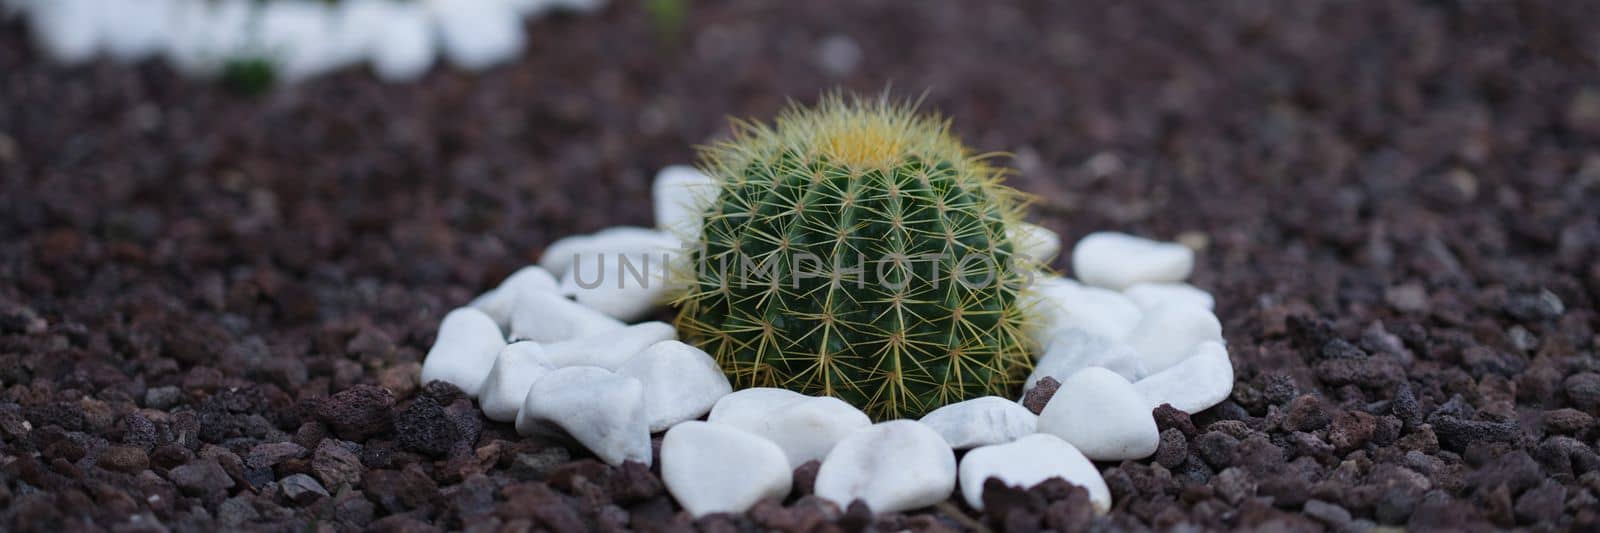 ot of beautiful little cactus grows in flower bed with stones around by kuprevich